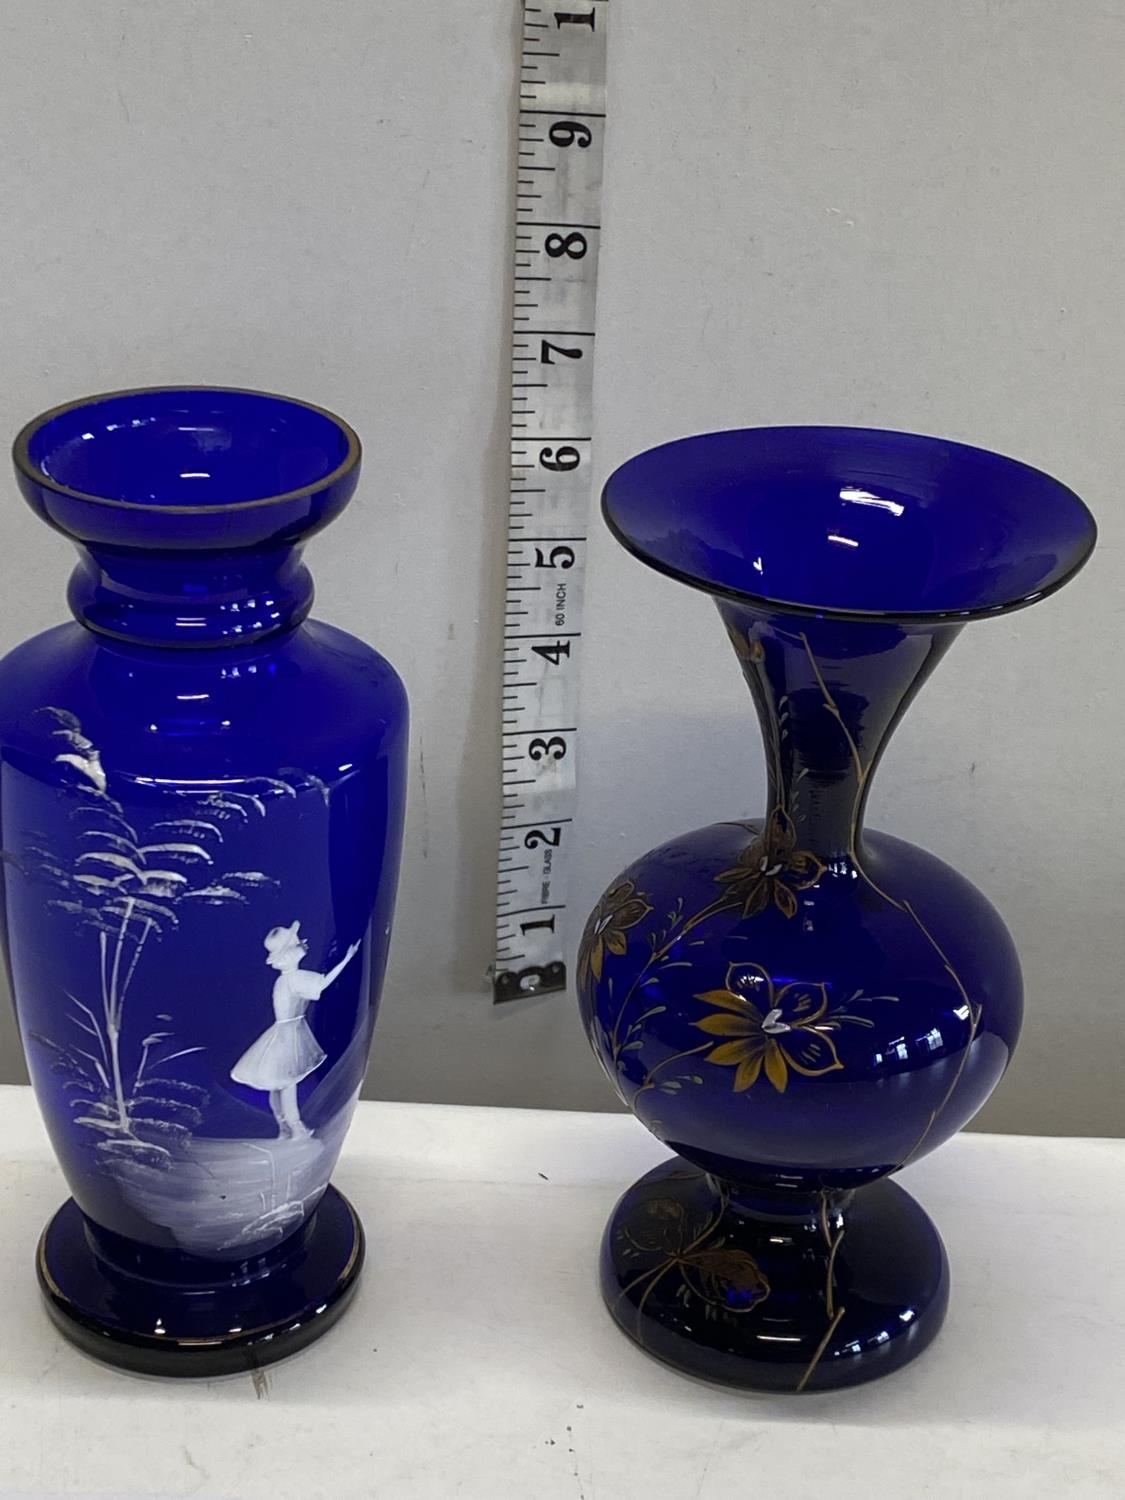 A Mary Gregory style blue vase and a Bohemian blue vase